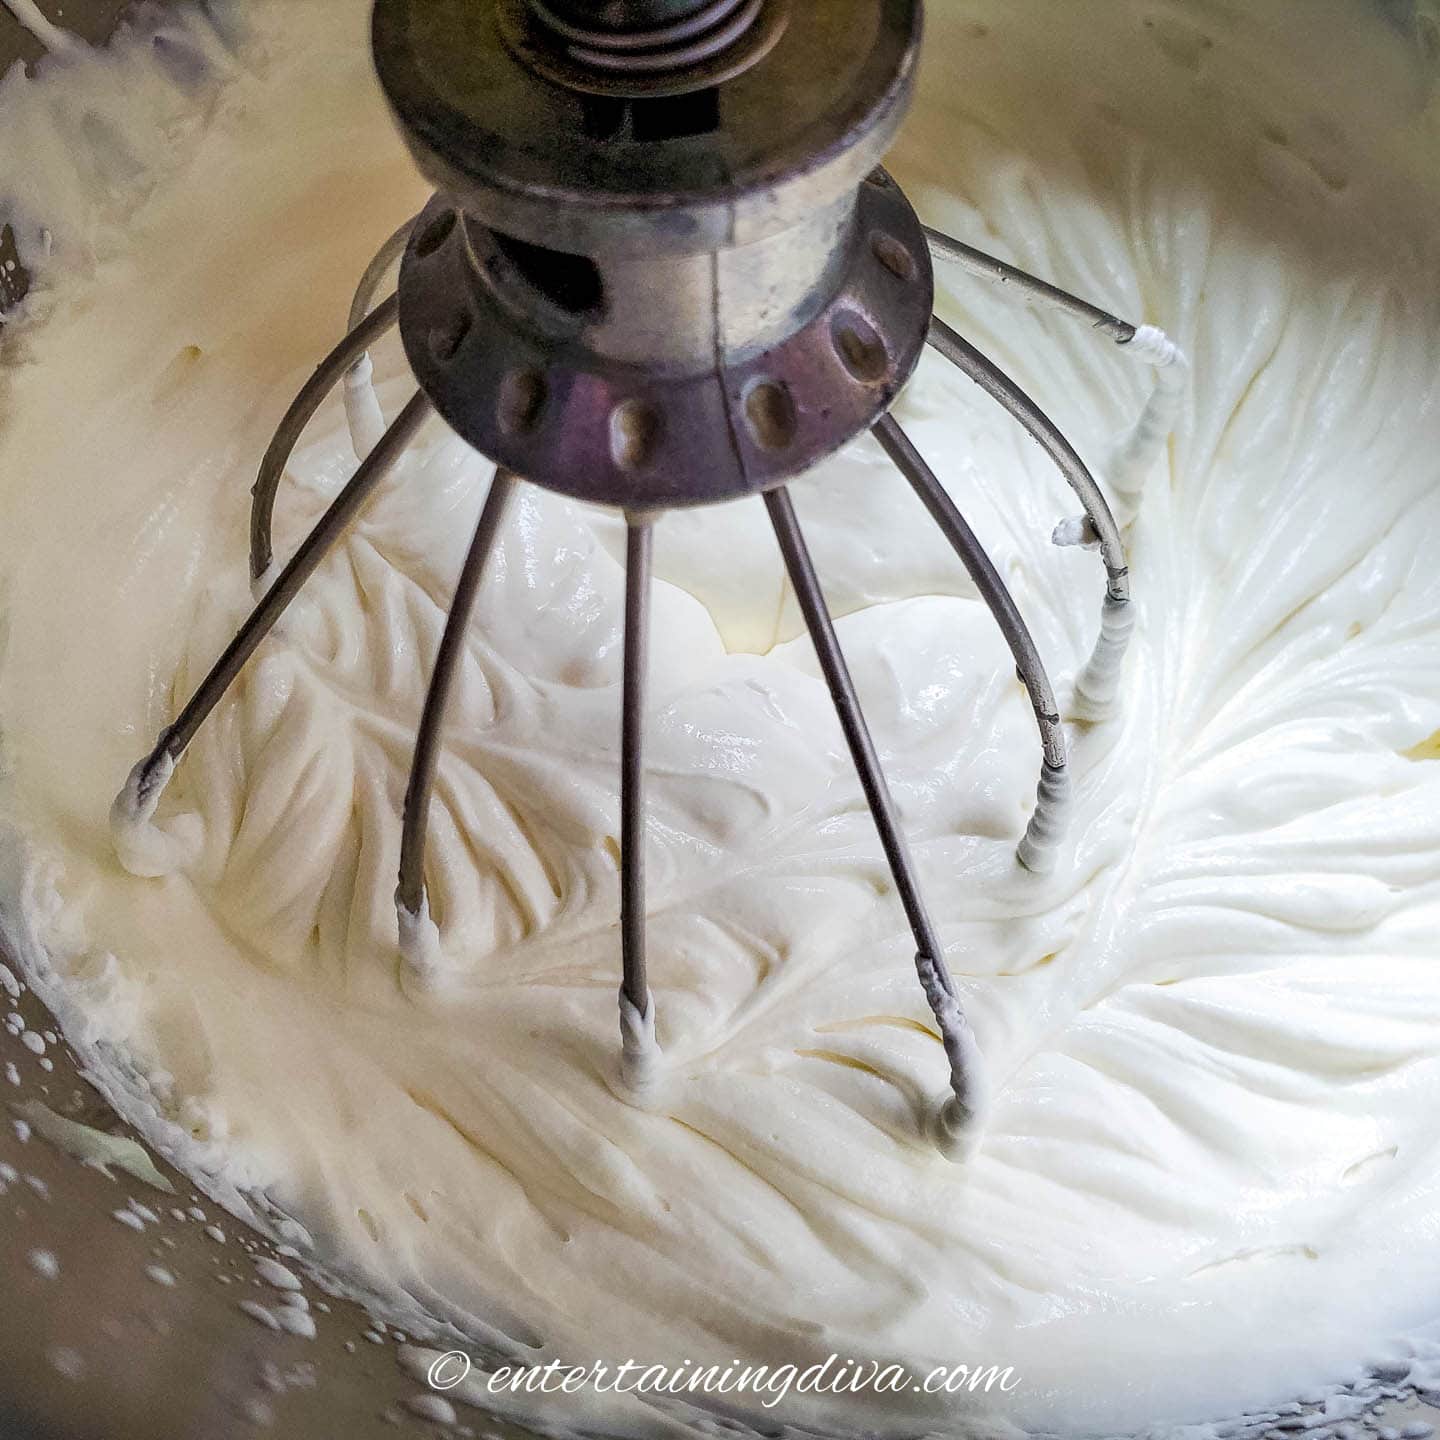 beater mixing whipping cream and sweetened condensed milk together